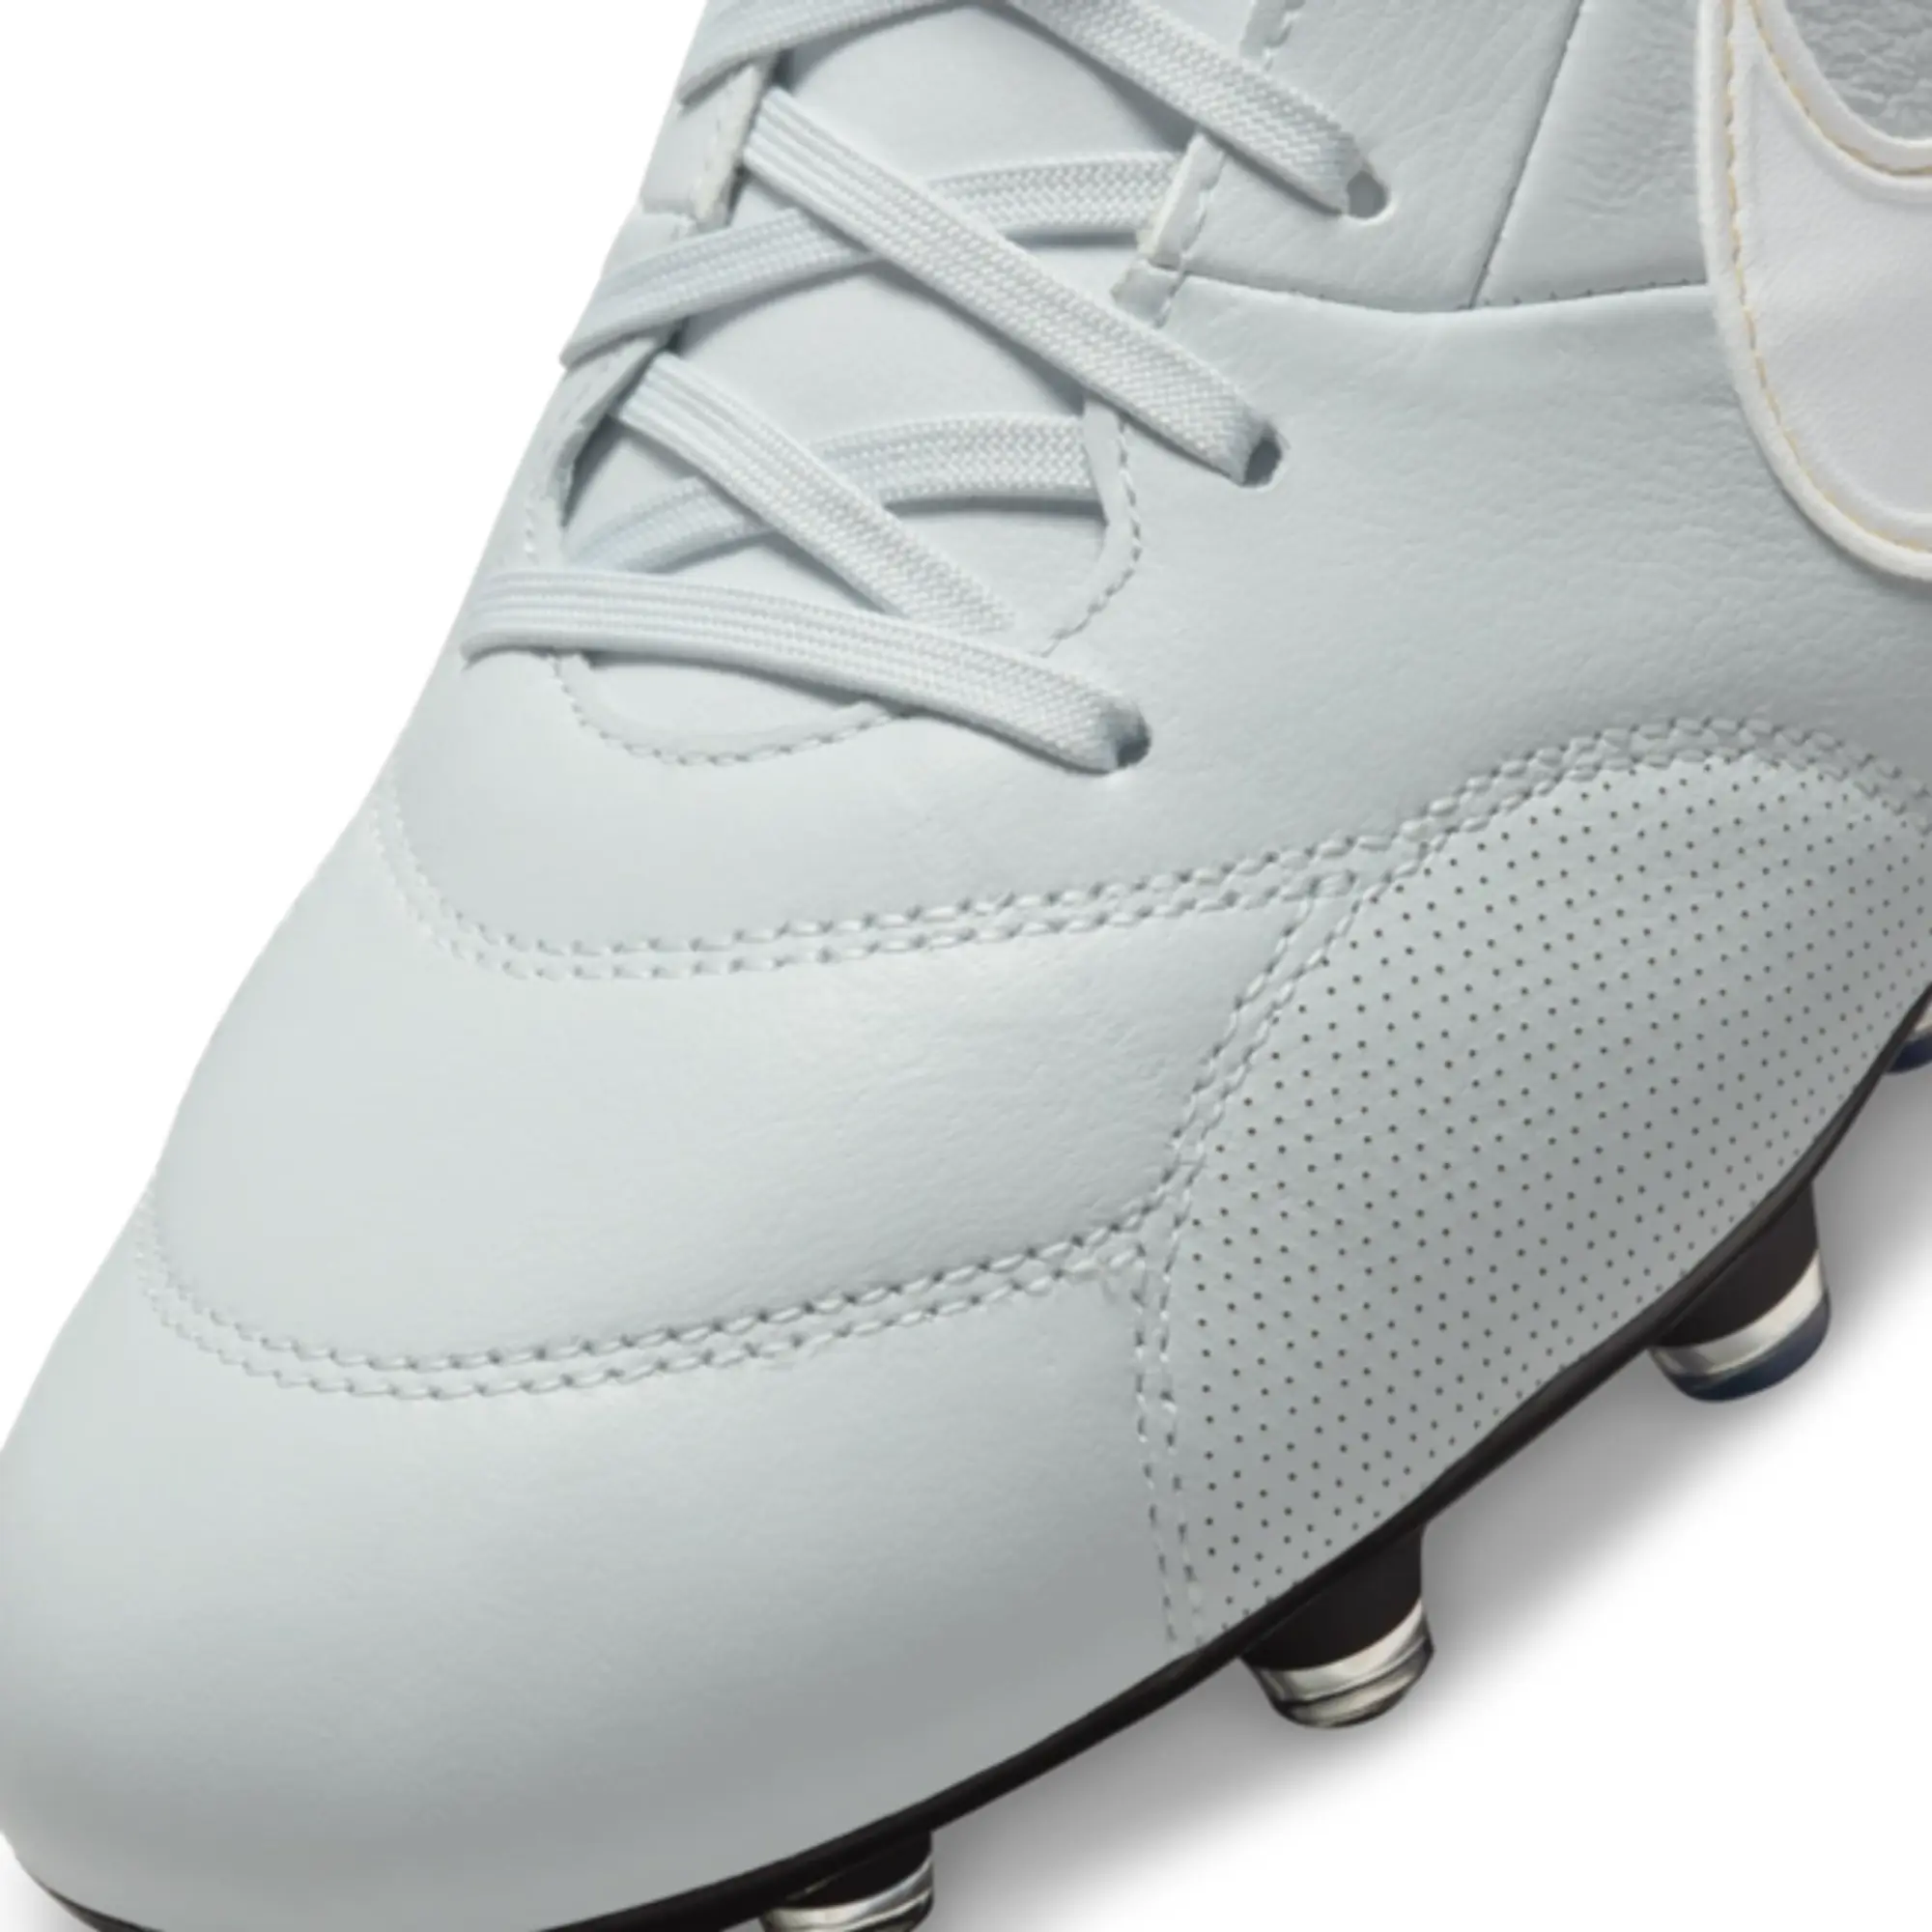 The Nike Premier 3 FG Firm-Ground Football Boots - Grey